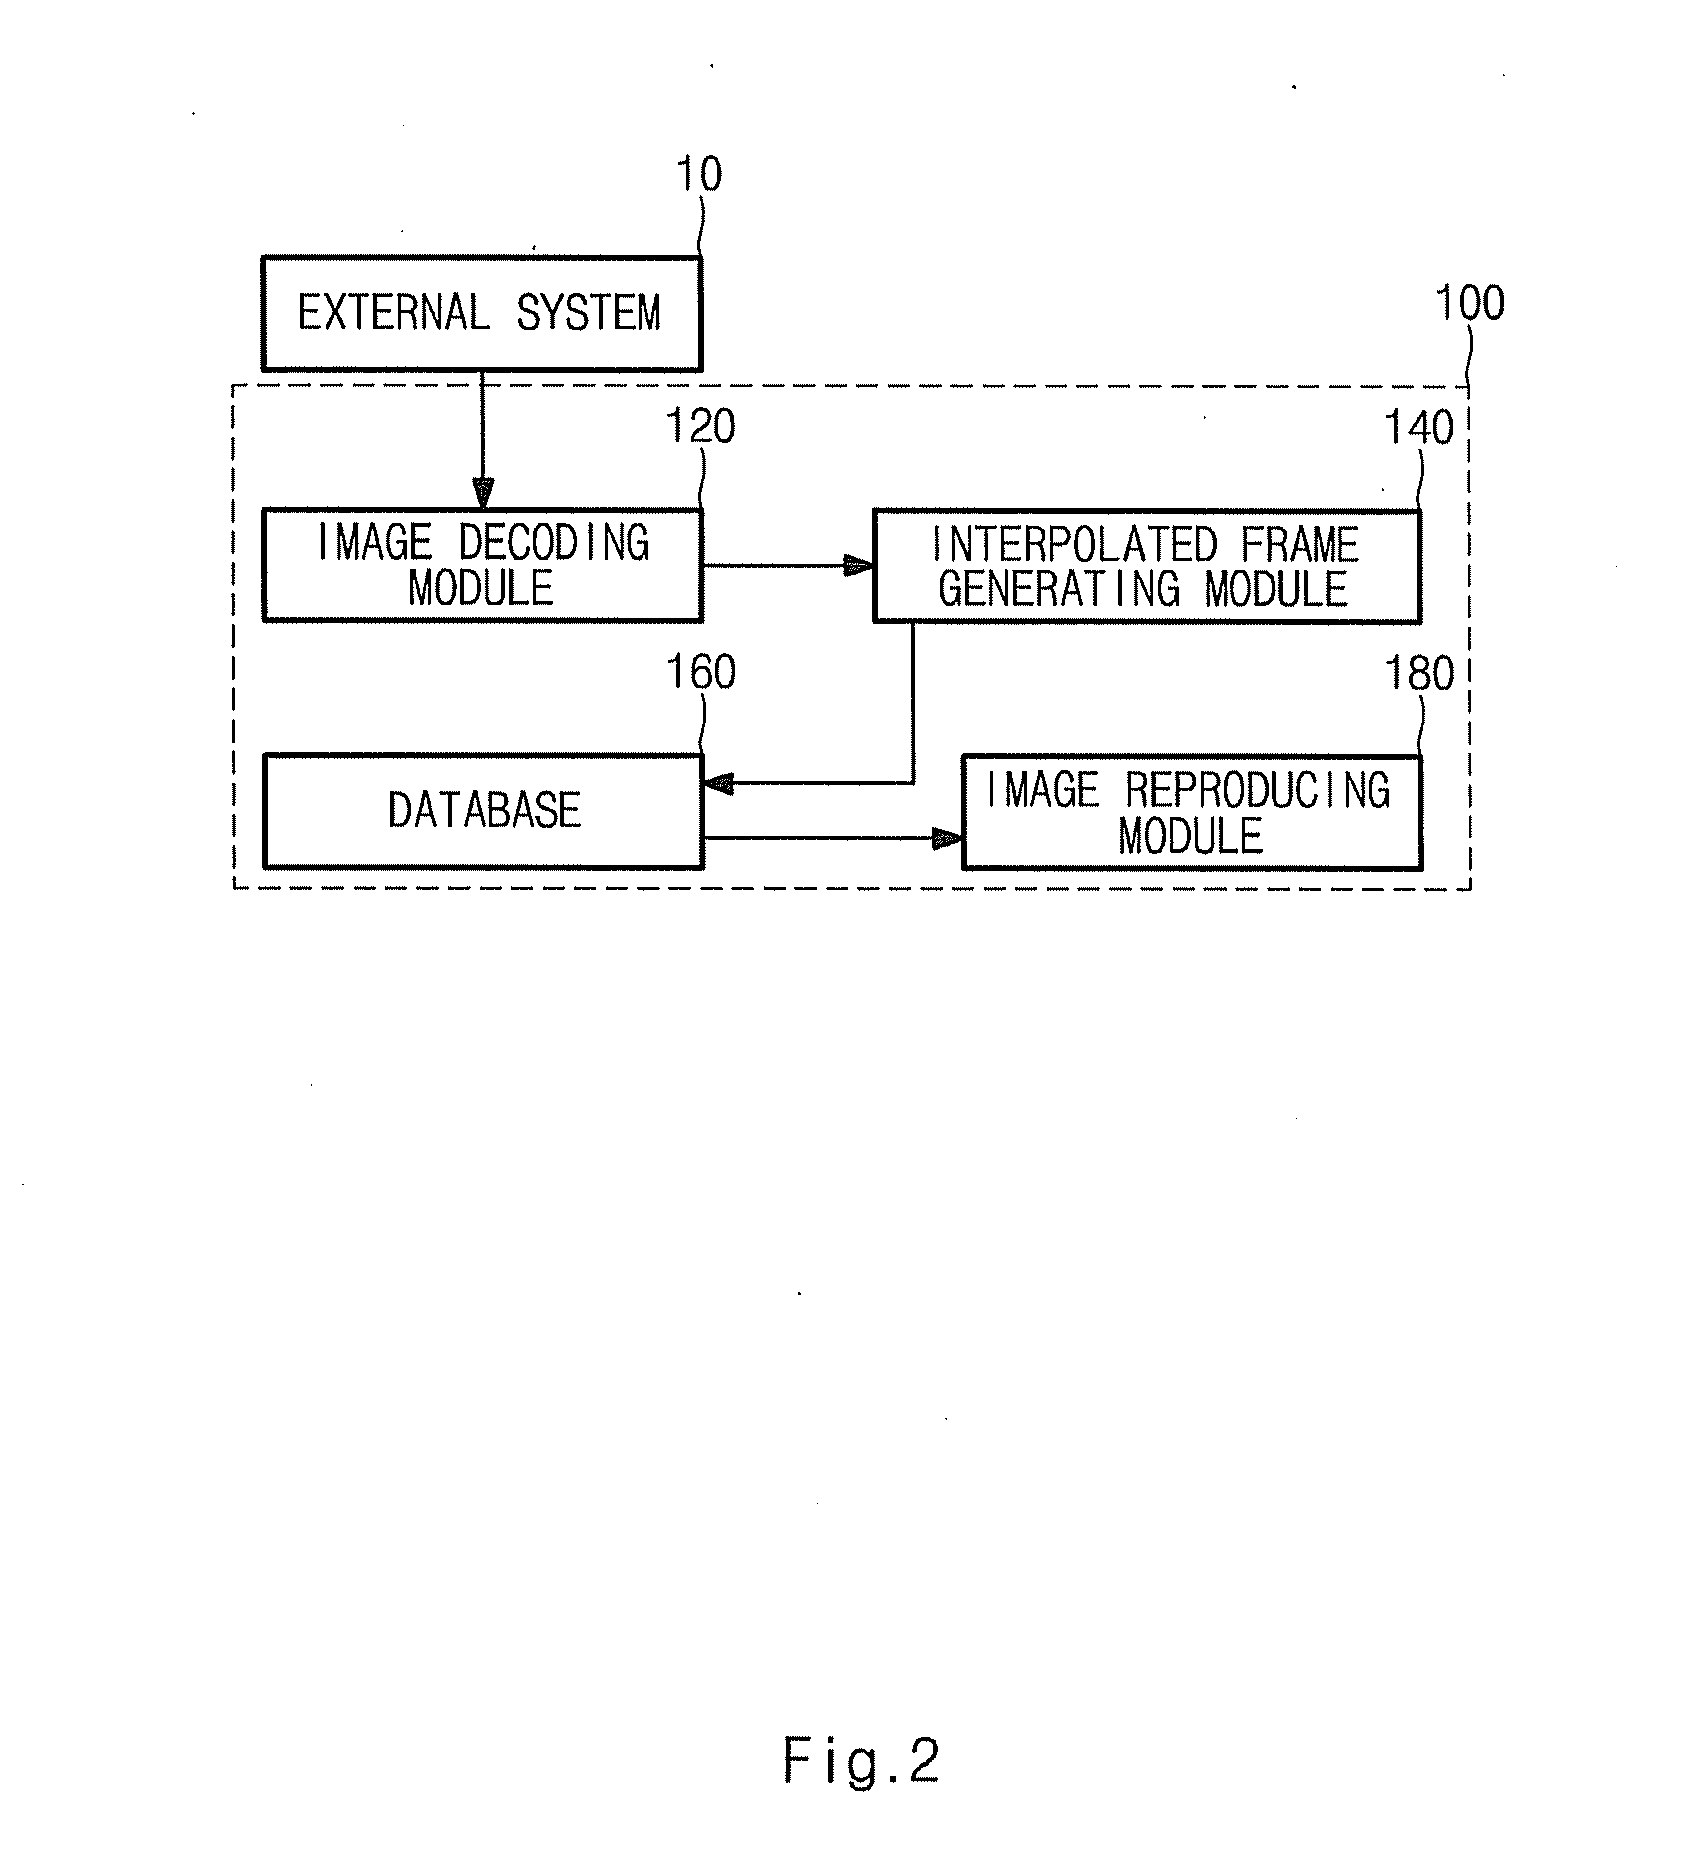 Apparatus for generating interpolated frame